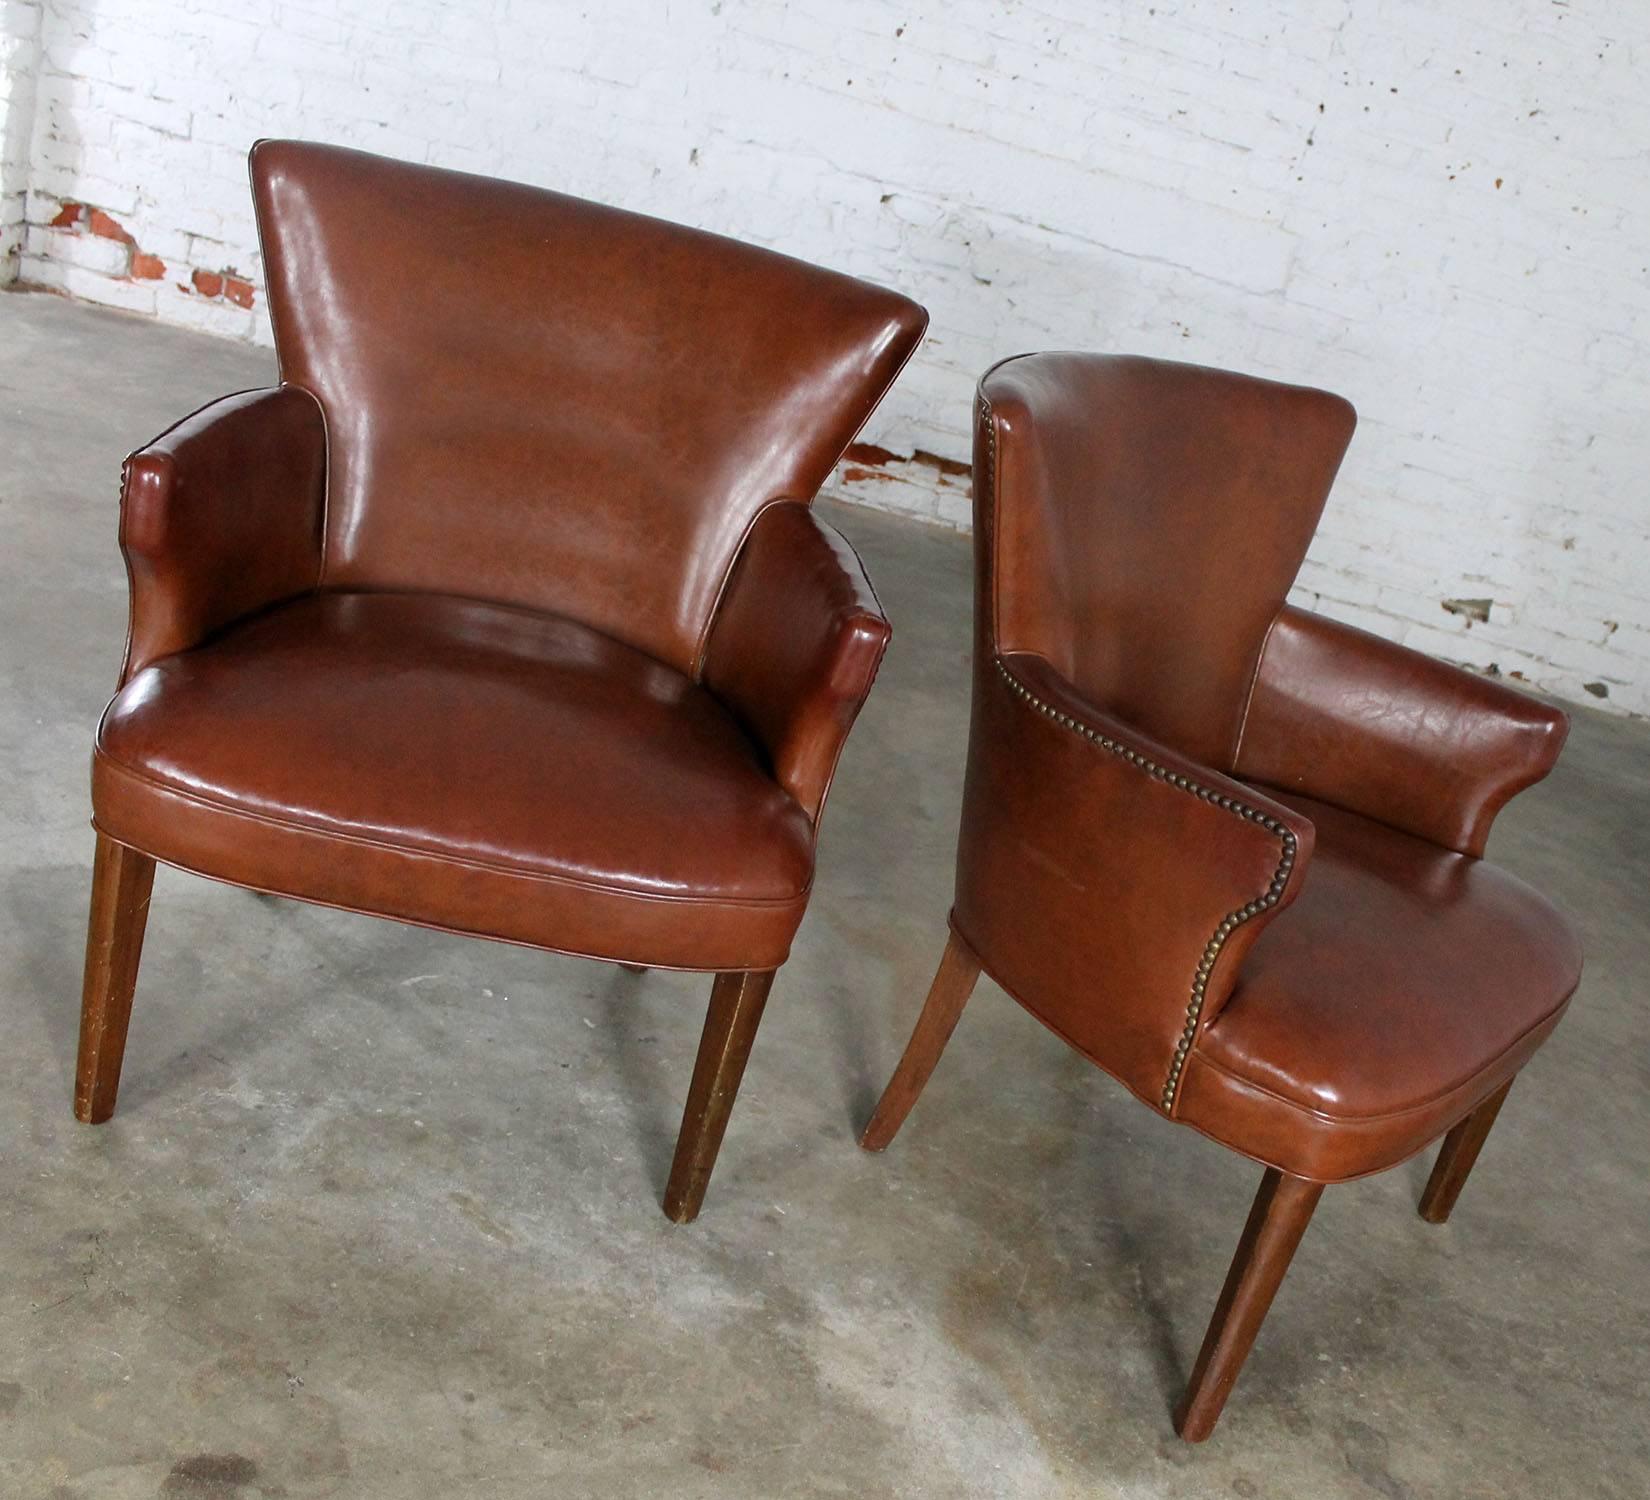 Petite pair of Art Deco armchairs with brown faux leather original upholstery and nailhead accent, circa 1940s. These great side chairs are in wonderful vintage condition. There are no tears or holes in the upholstery and the springs have been